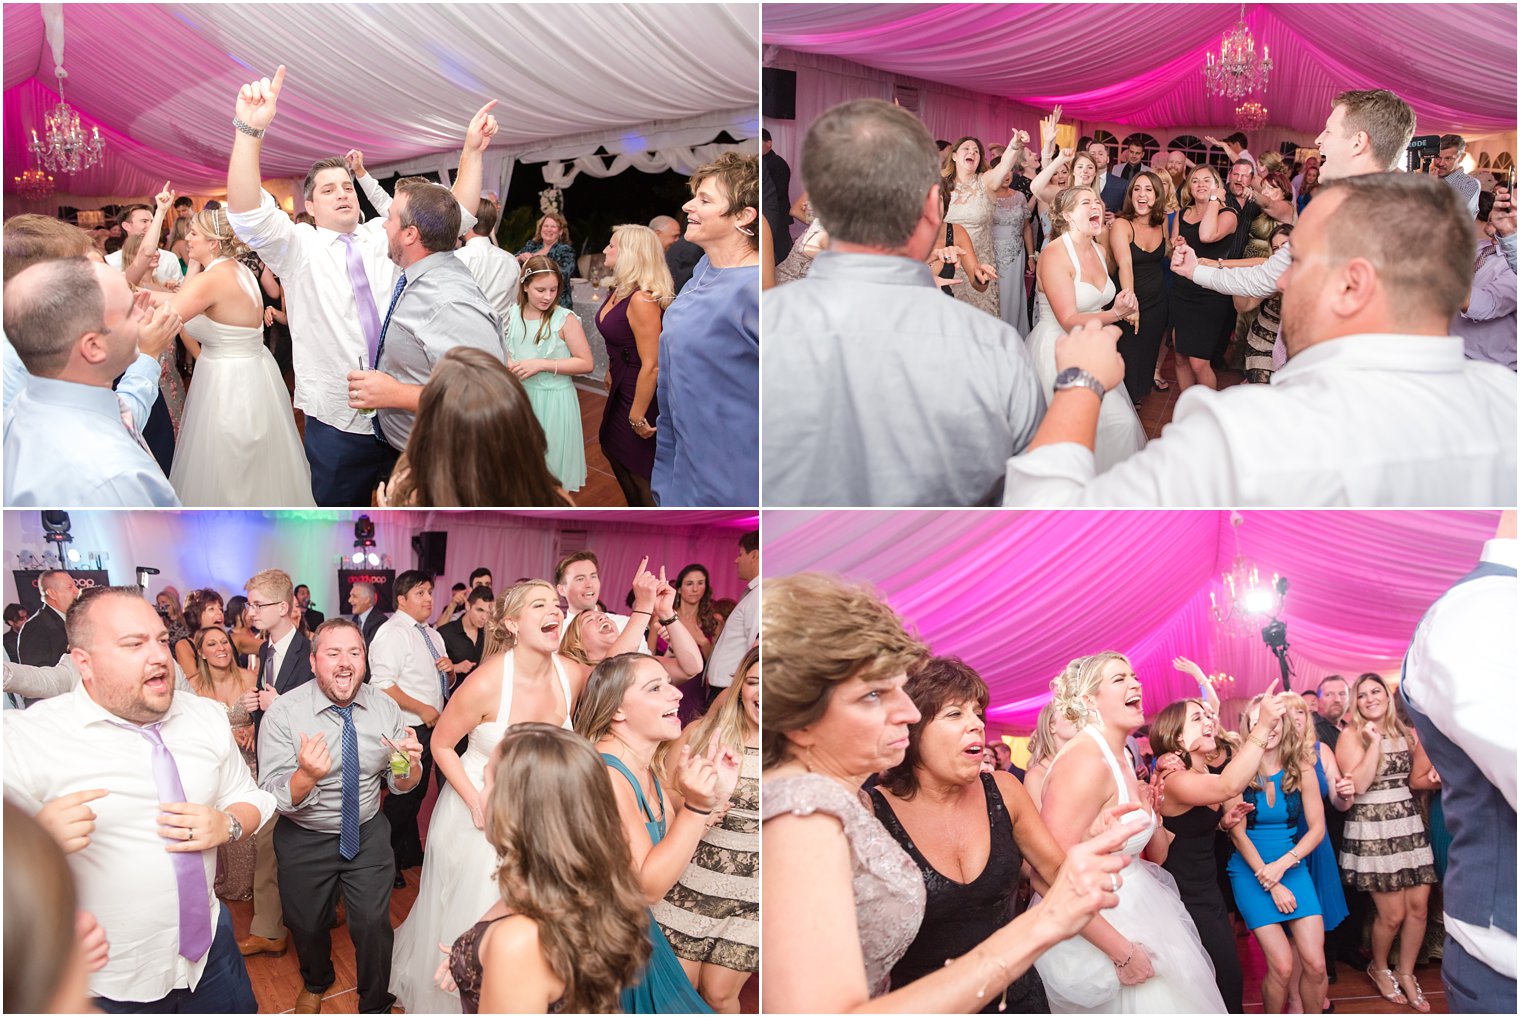 Wedding guests dancing at Windows on the Water at Frogbridge tented wedding reception